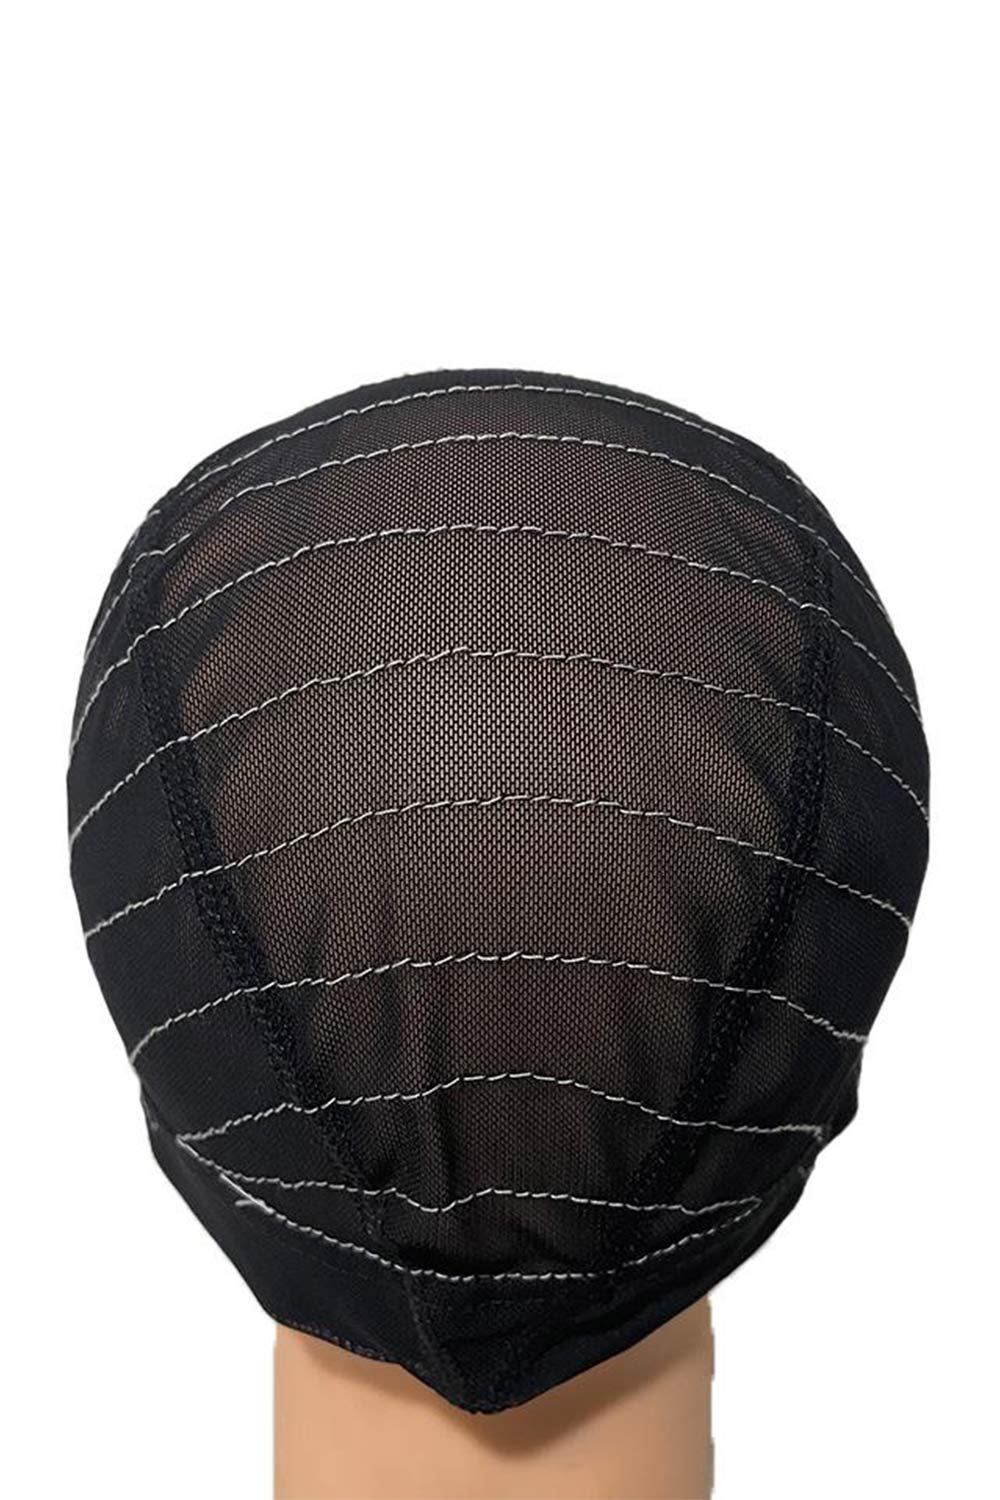 Ygwigs Elastic White Wire Wig Cap Mesh Dome Wig Cap with Guideline Map for Making Your Own Wig 4*4 Lace Closure I Style